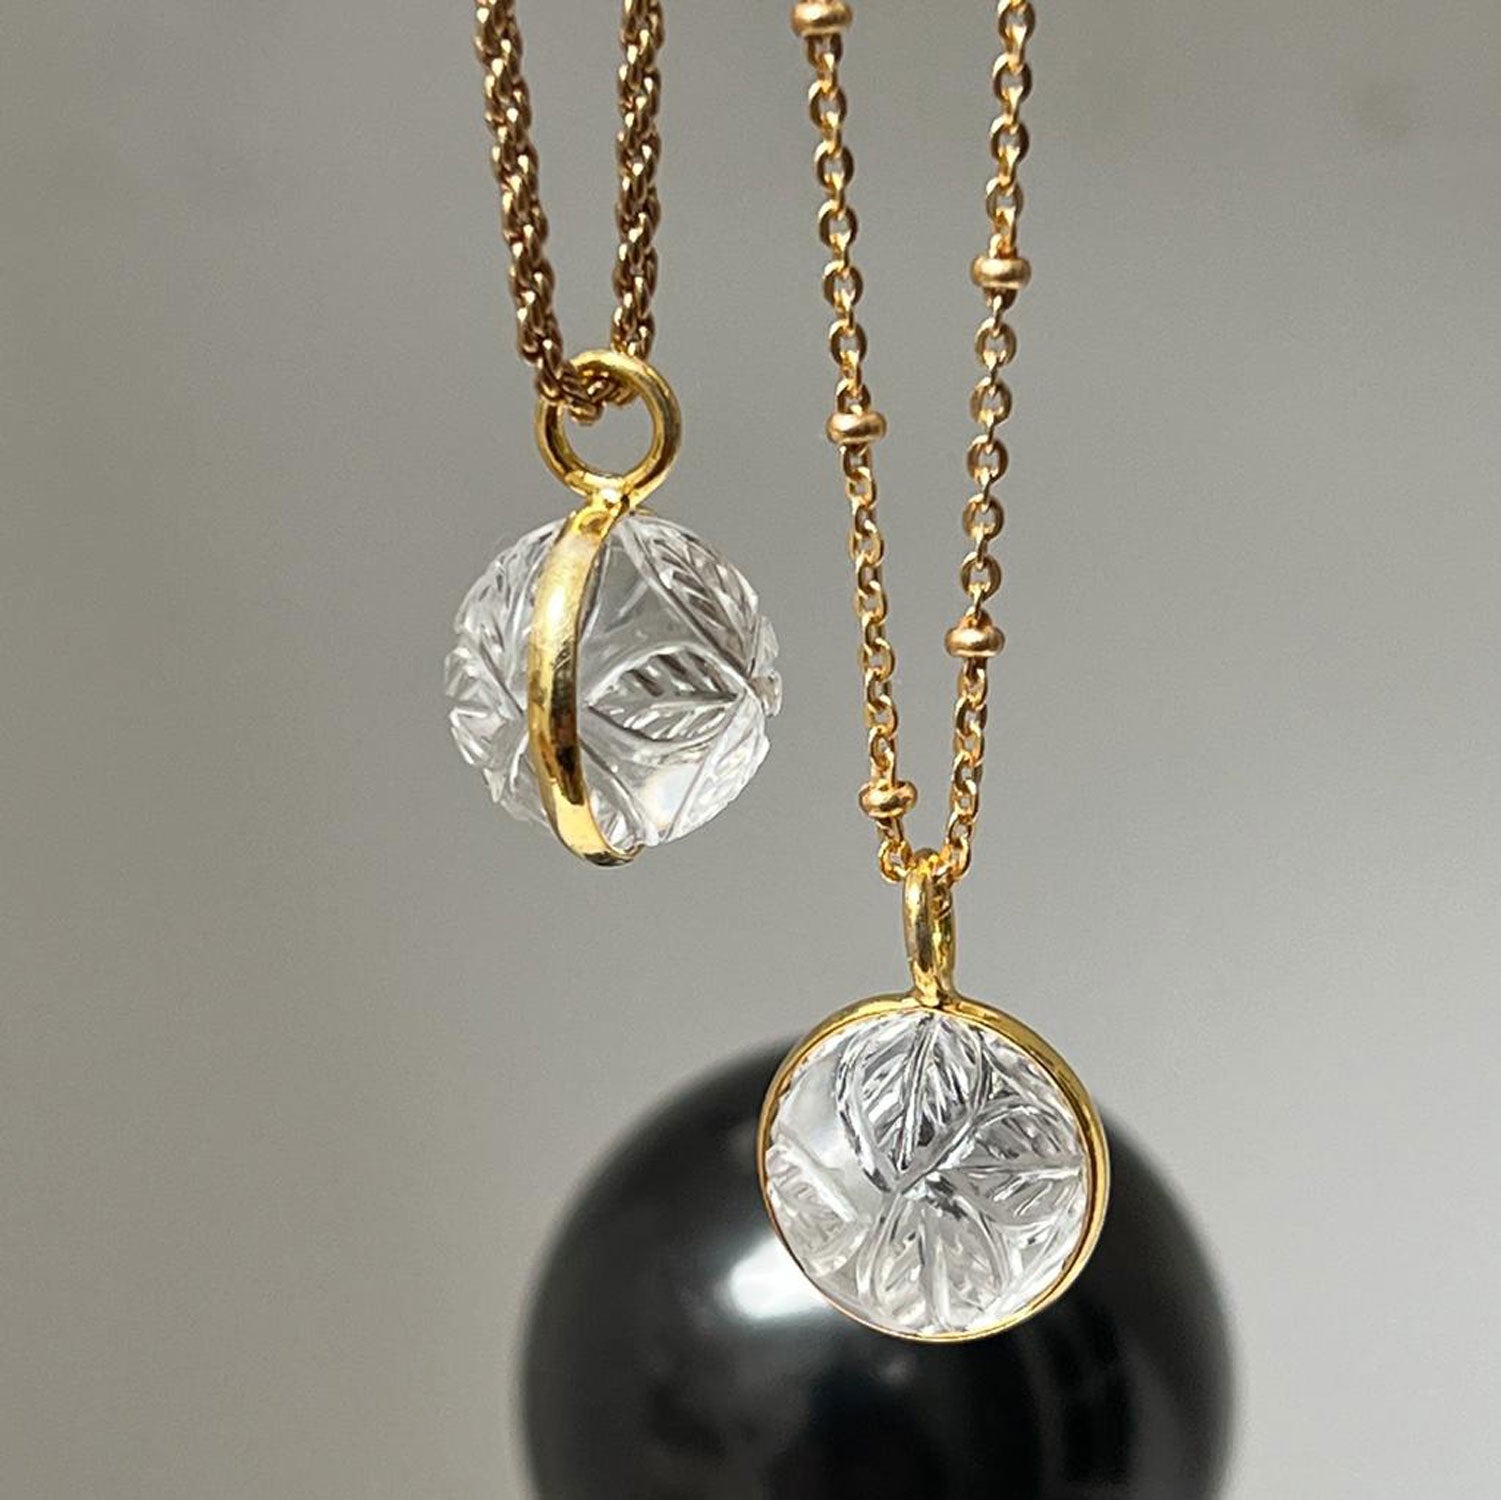 Carved Rock Crystal Ball Pendant on Long Satellite Chain